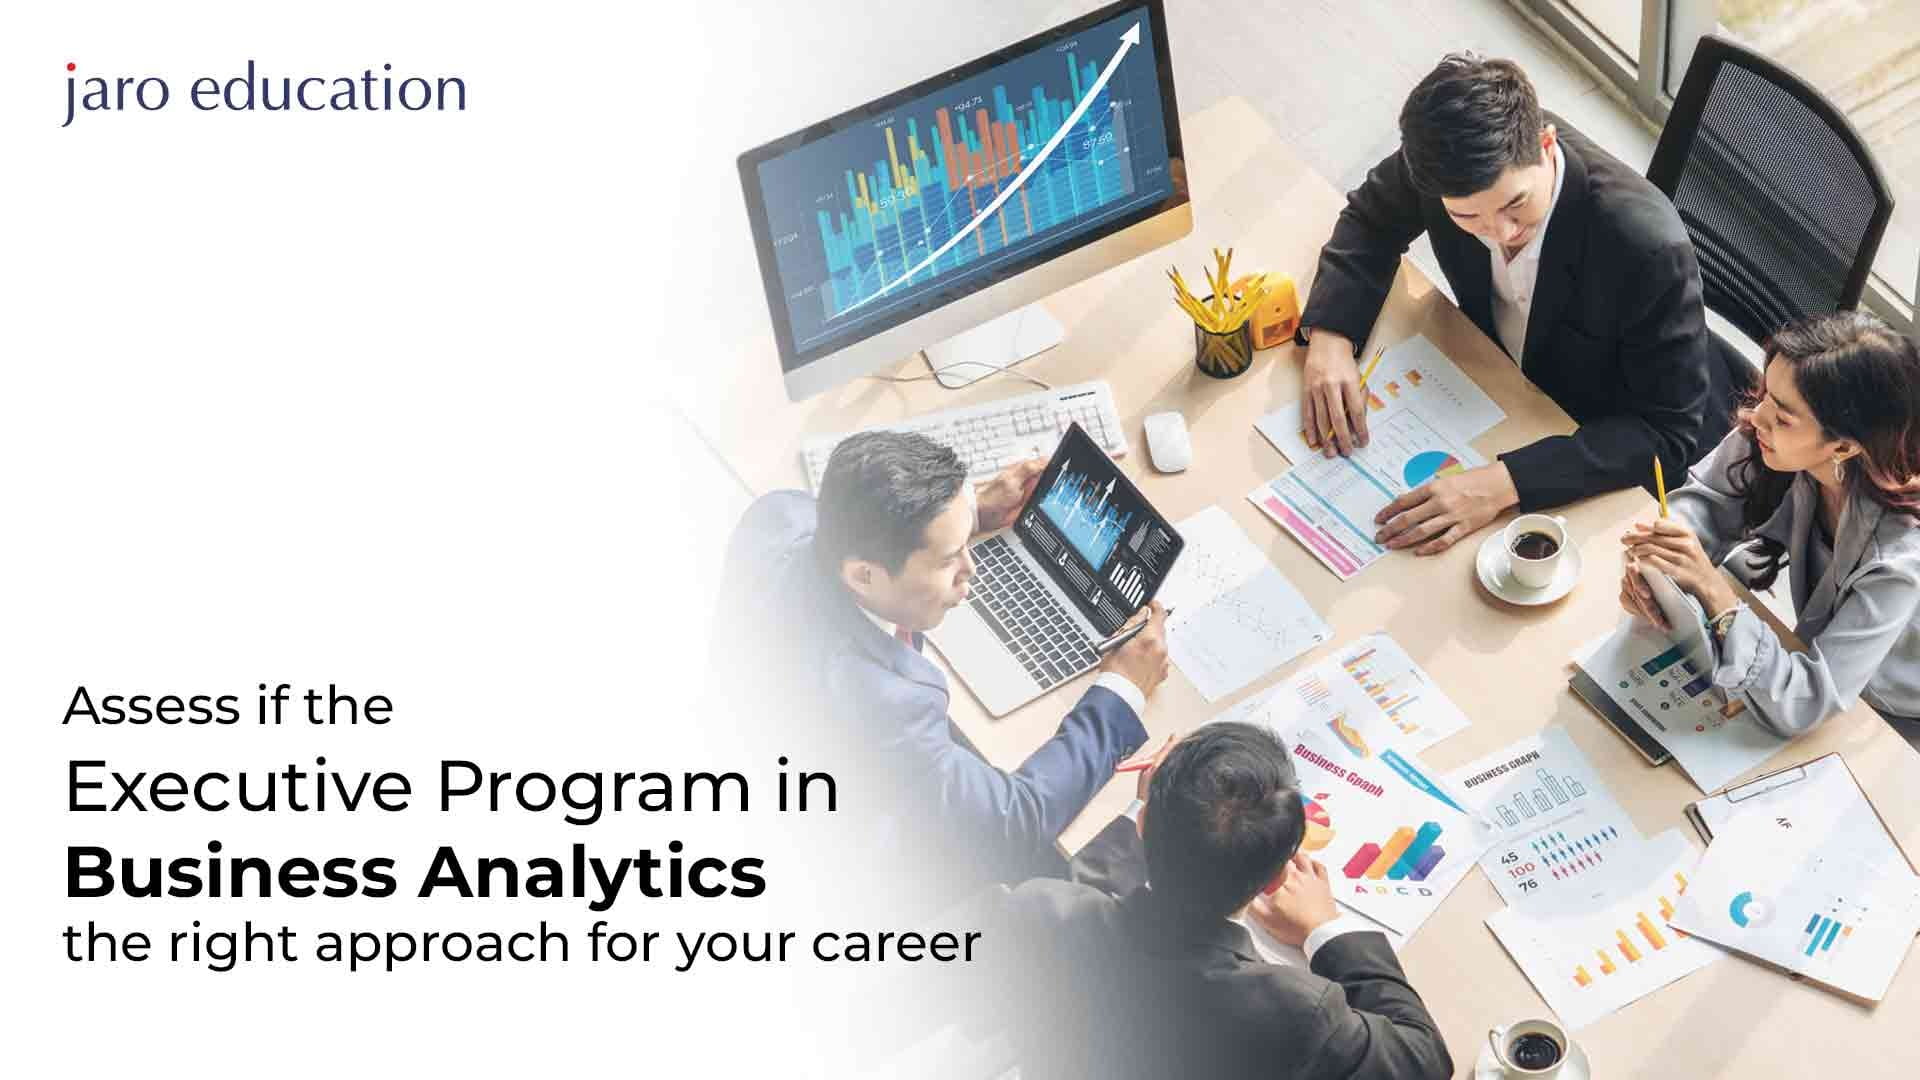 Assess-if-the-Executive-Program-in-Business-Analytics-the-right-approach-for-your-career_7_11zon jaro